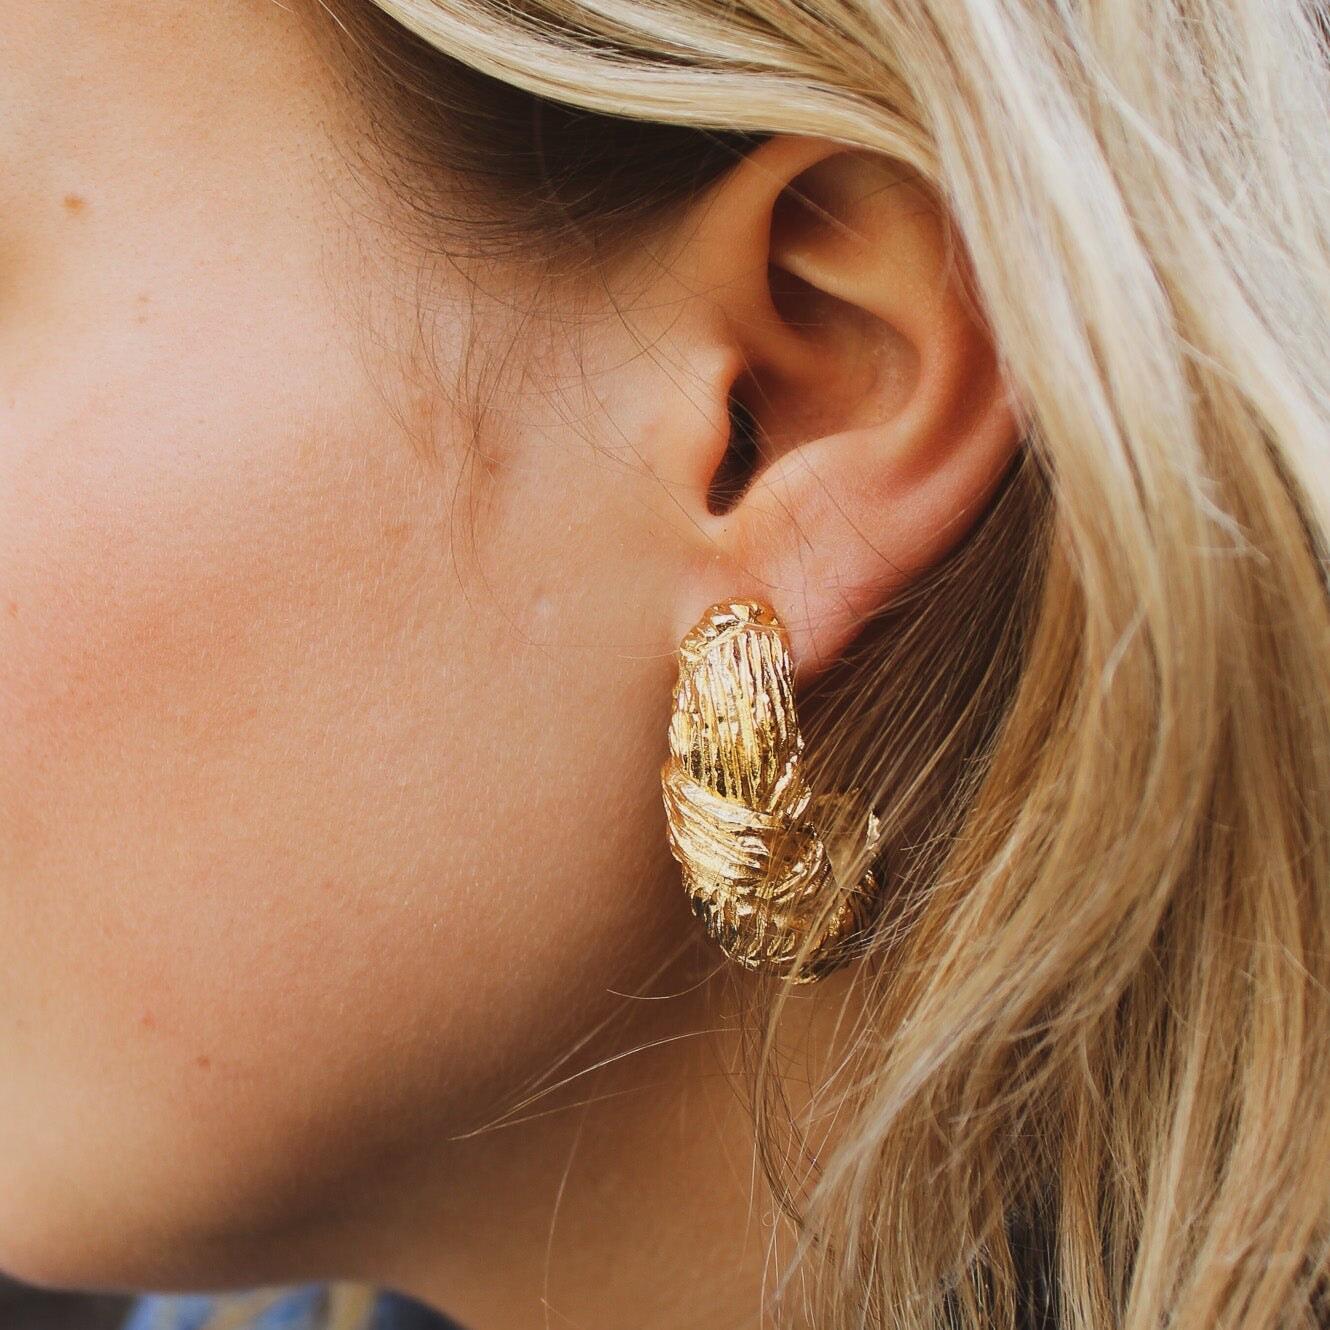 Vintage Givenchy Earrings 1980s for Pierced Ears

Add 80s vibes to your wardrobe with these Vintage Givenchy Earrings.

Crafted from high-quality gold plated textured metal, these earrings were made in France in the early 1980s and are a dead stock